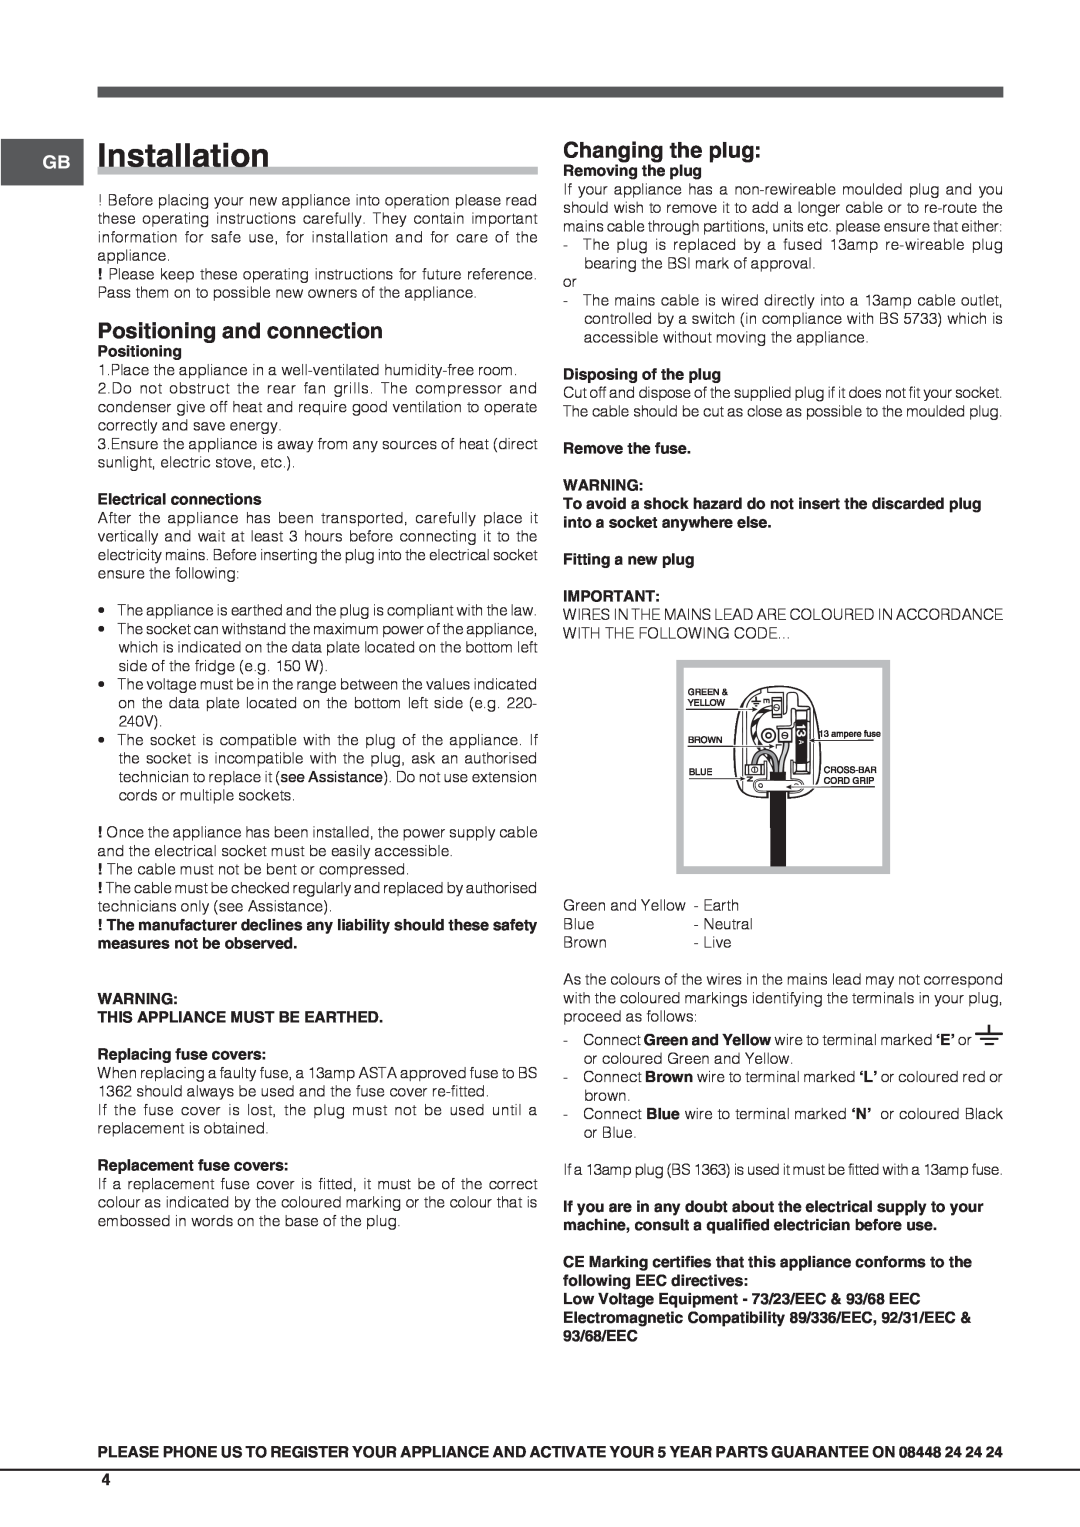 Hotpoint HM 3x AA AI manual GB Installation, Positioning and connection, Changing the plug 